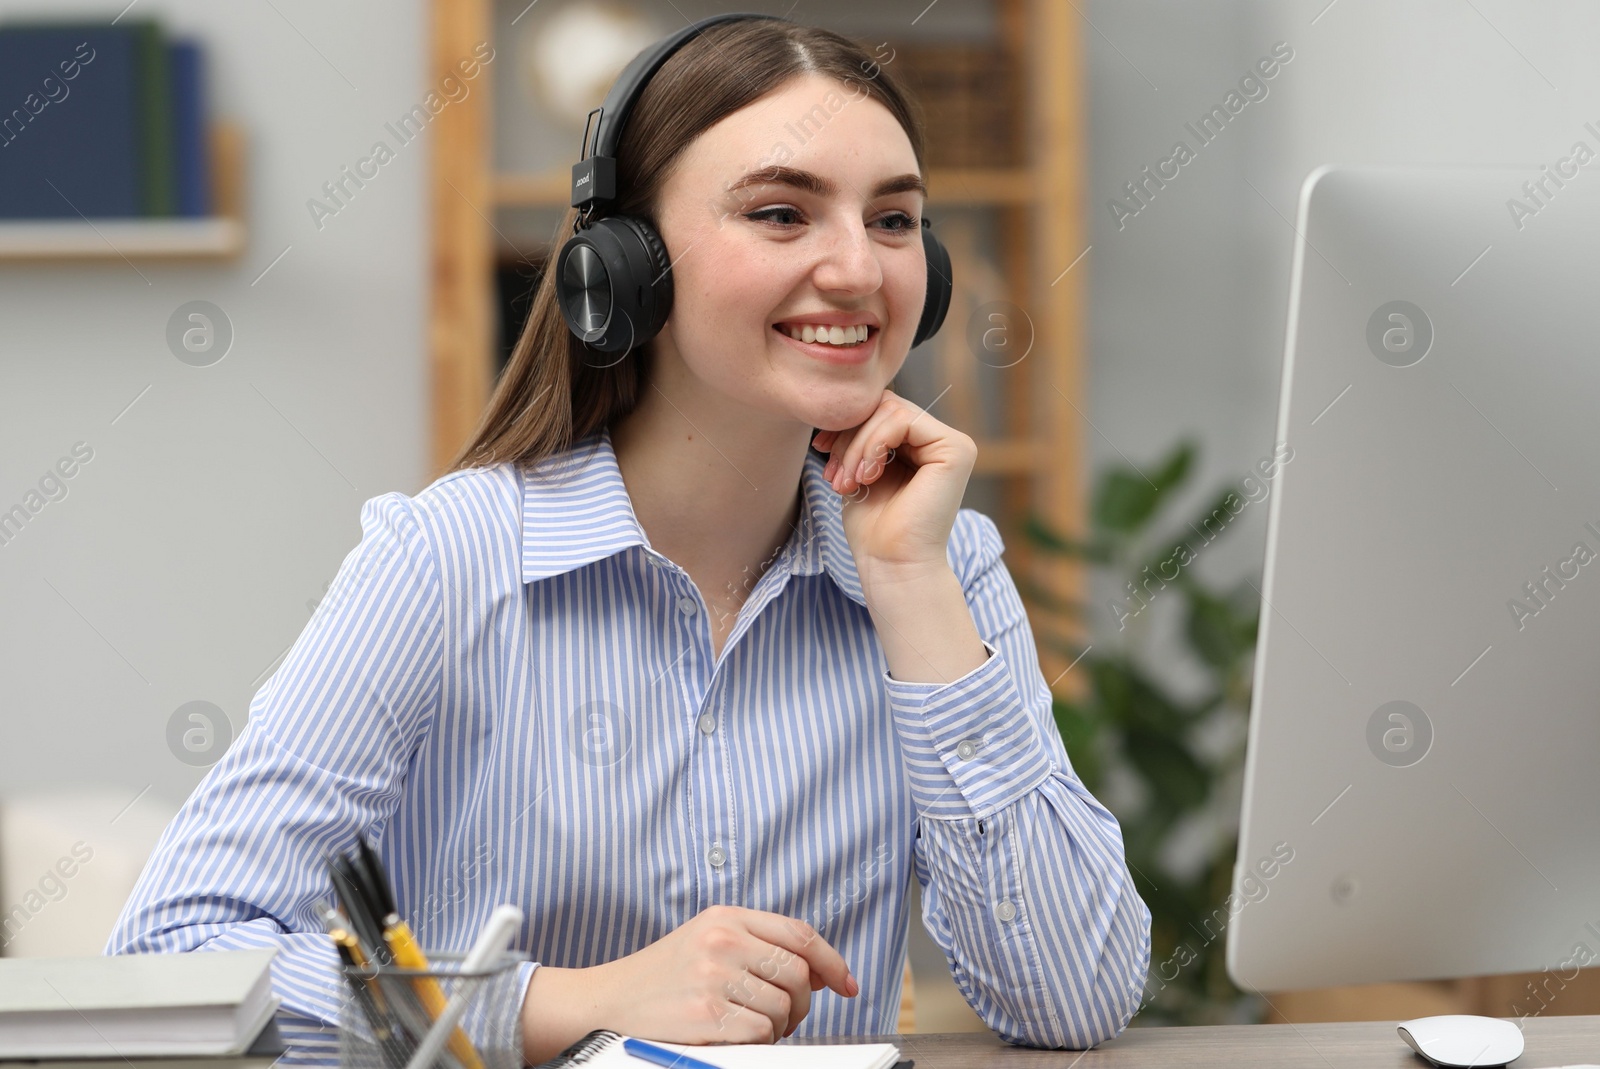 Photo of E-learning. Young woman using computer during online lesson at table indoors